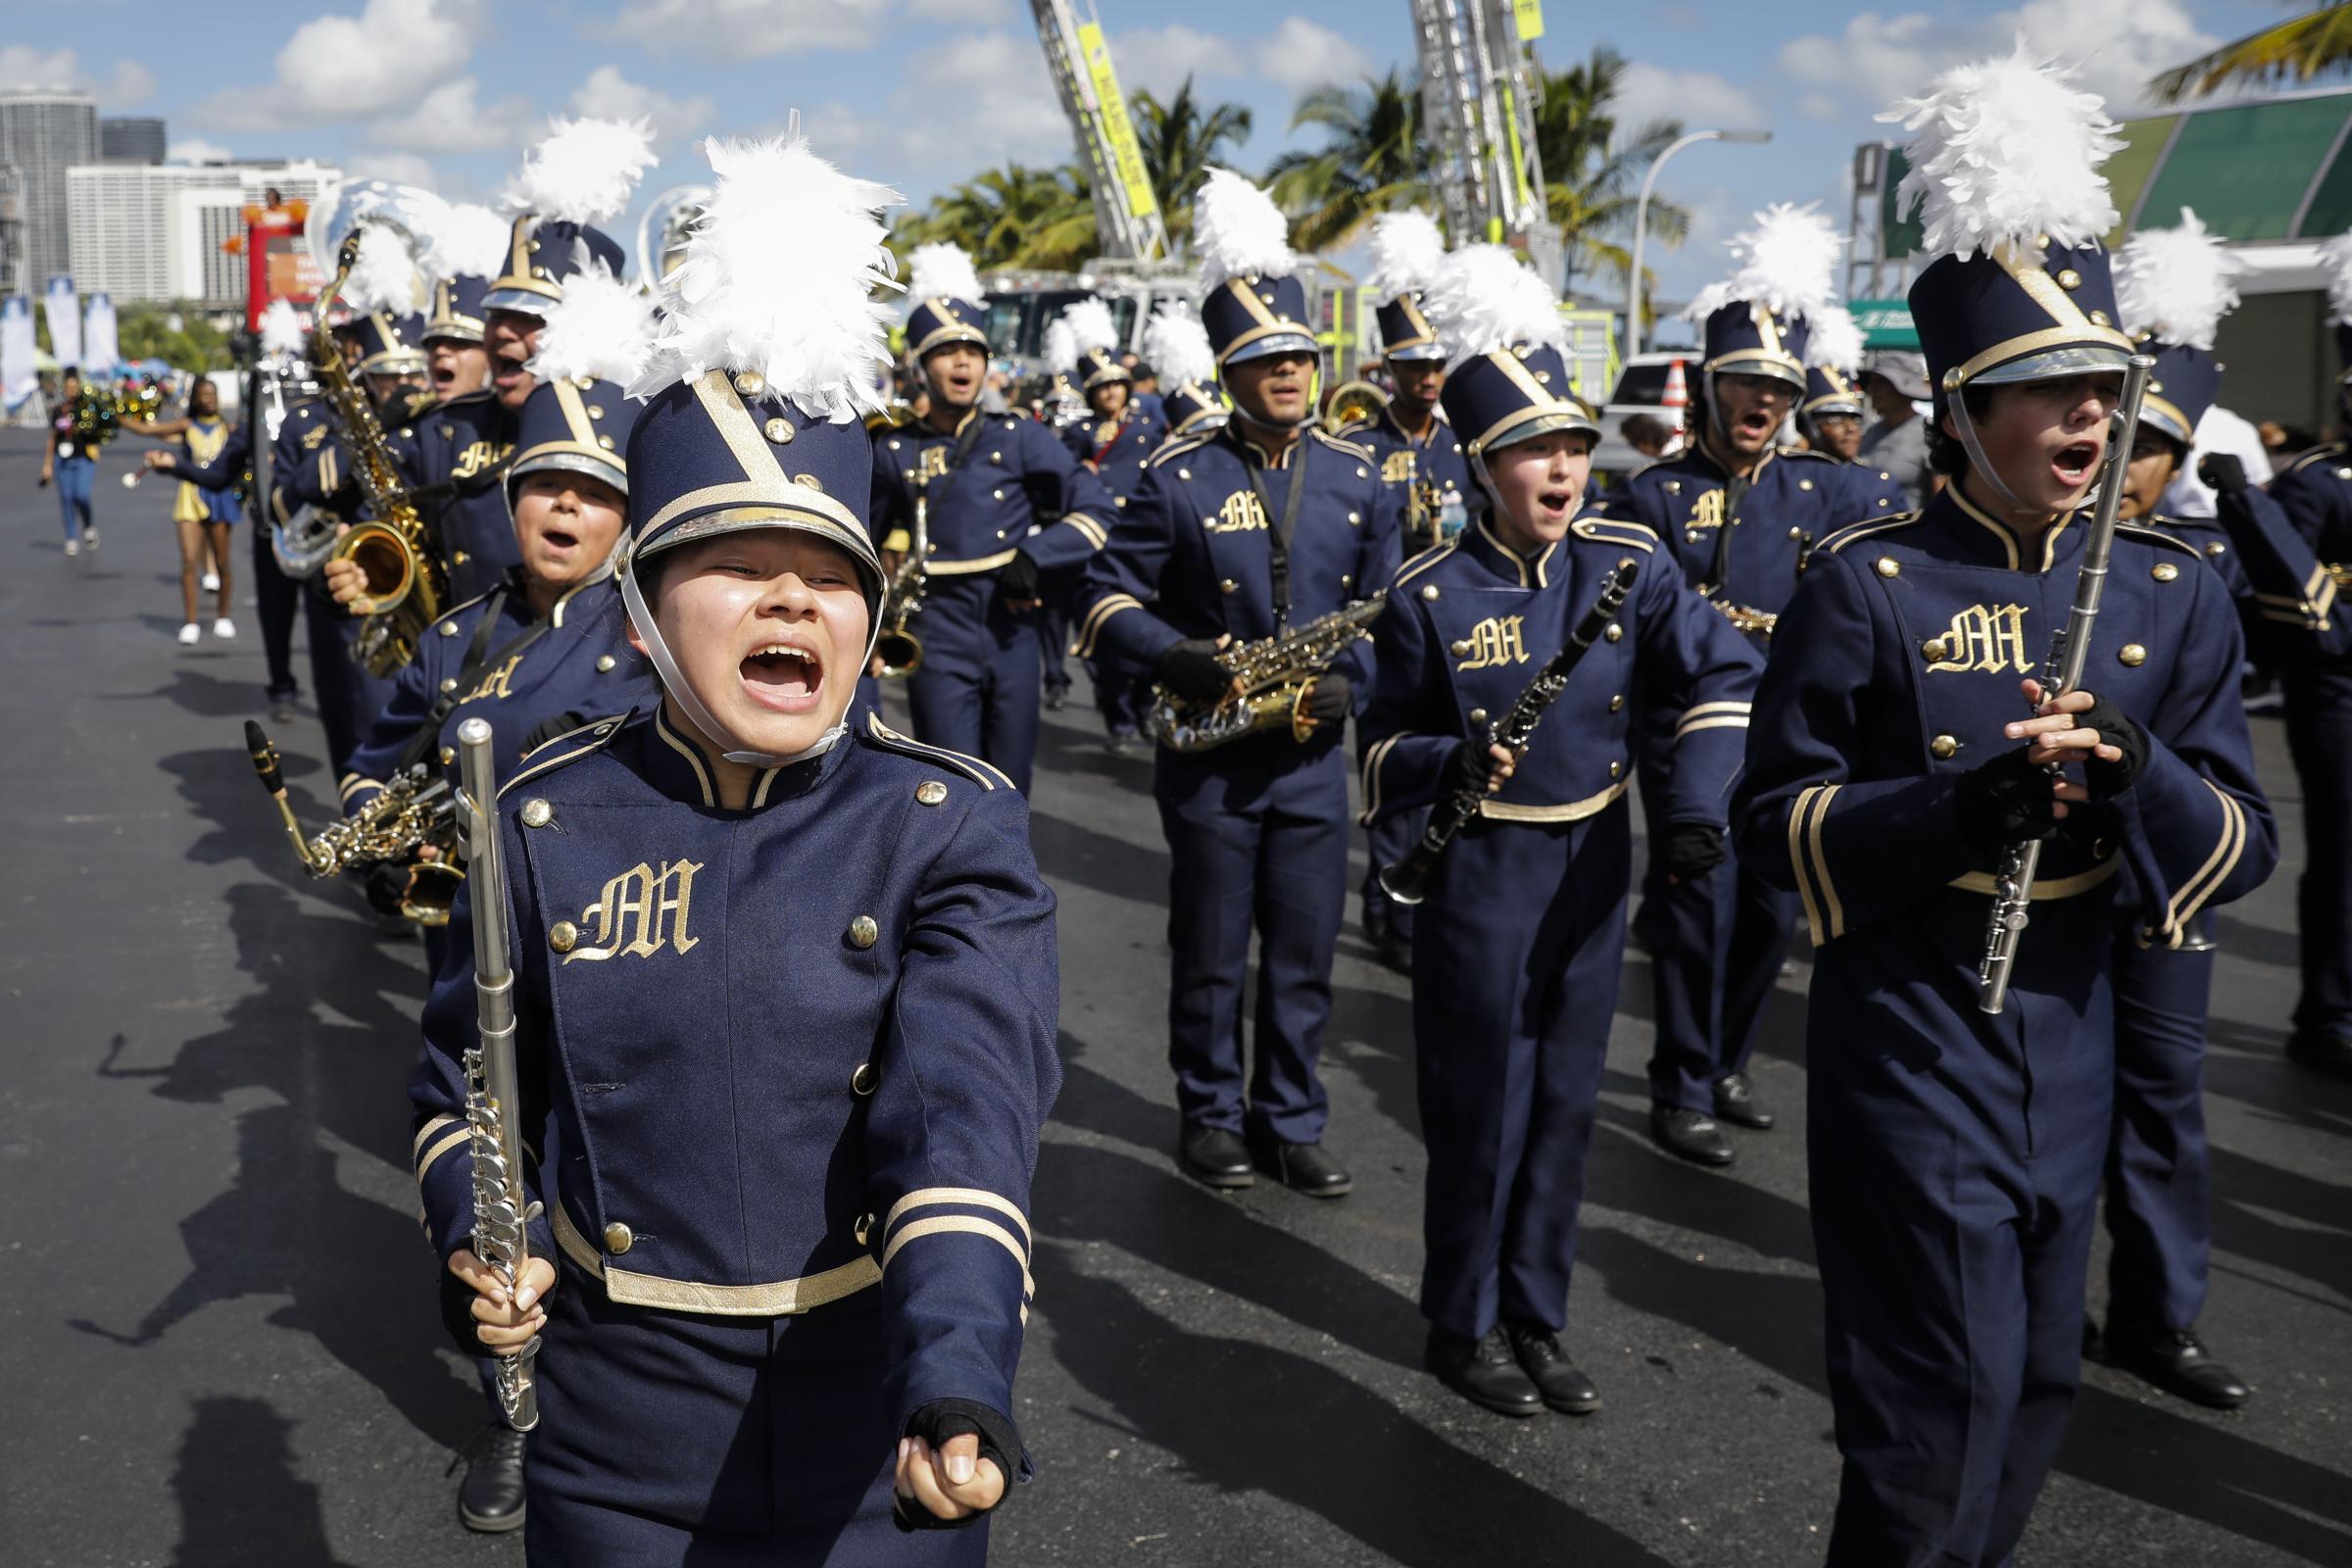 slideshow - Members of the Miami Senior High School Million Dollar Band take part in the "Hometown...